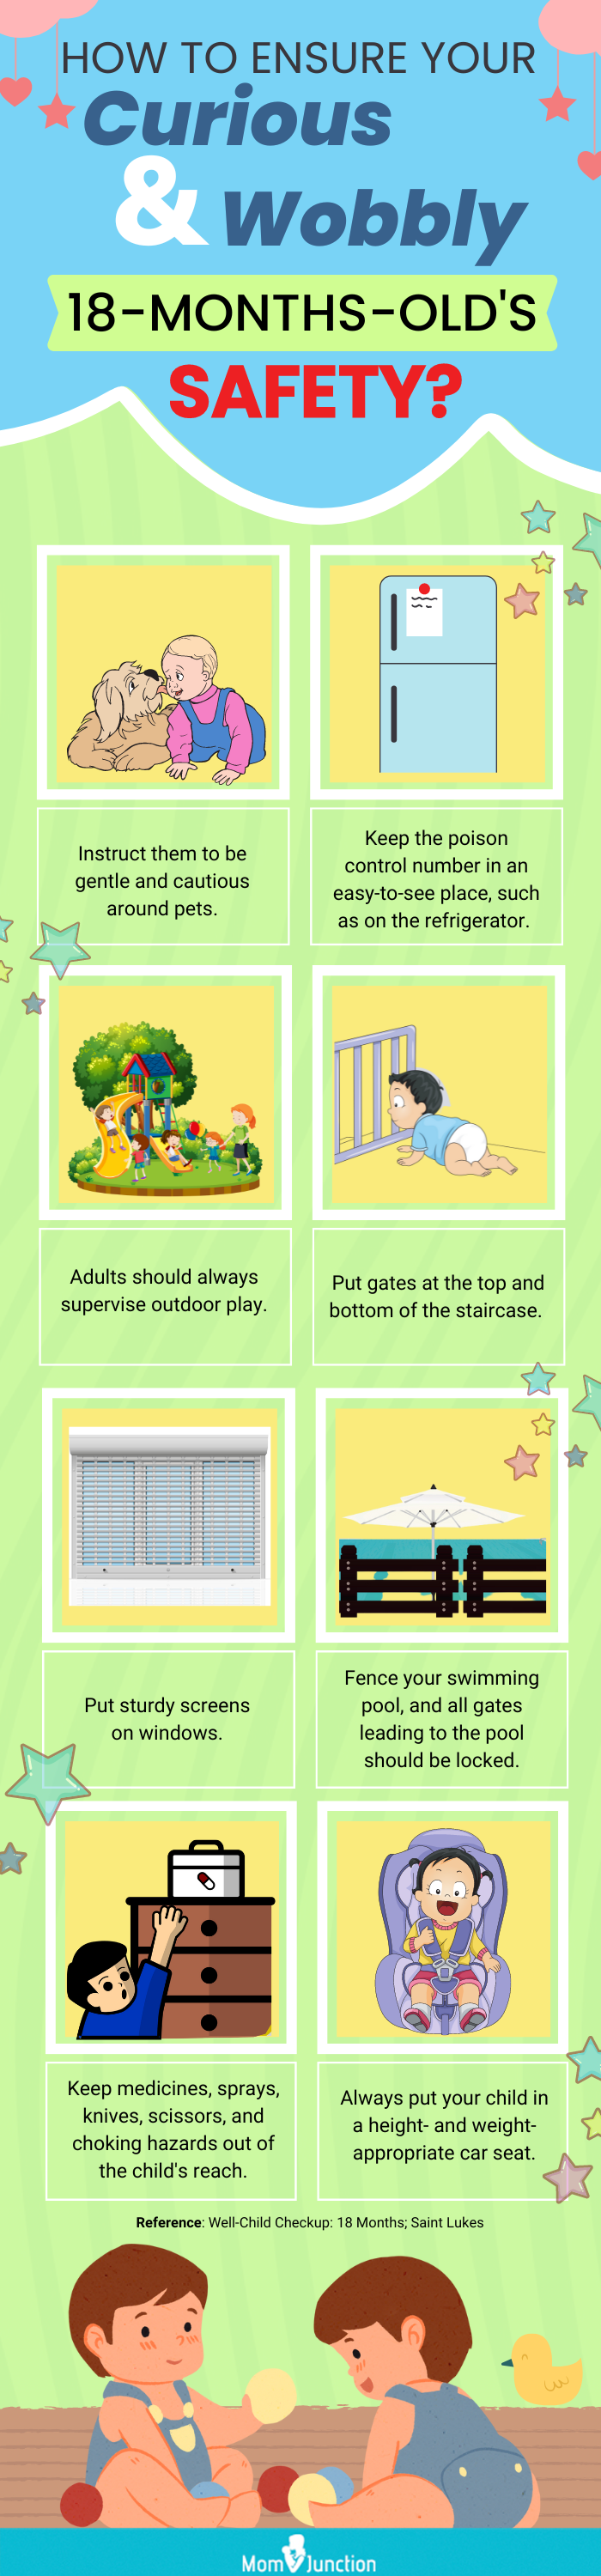 how to ensure your curious and wobbly 18 month old safety (infographic)